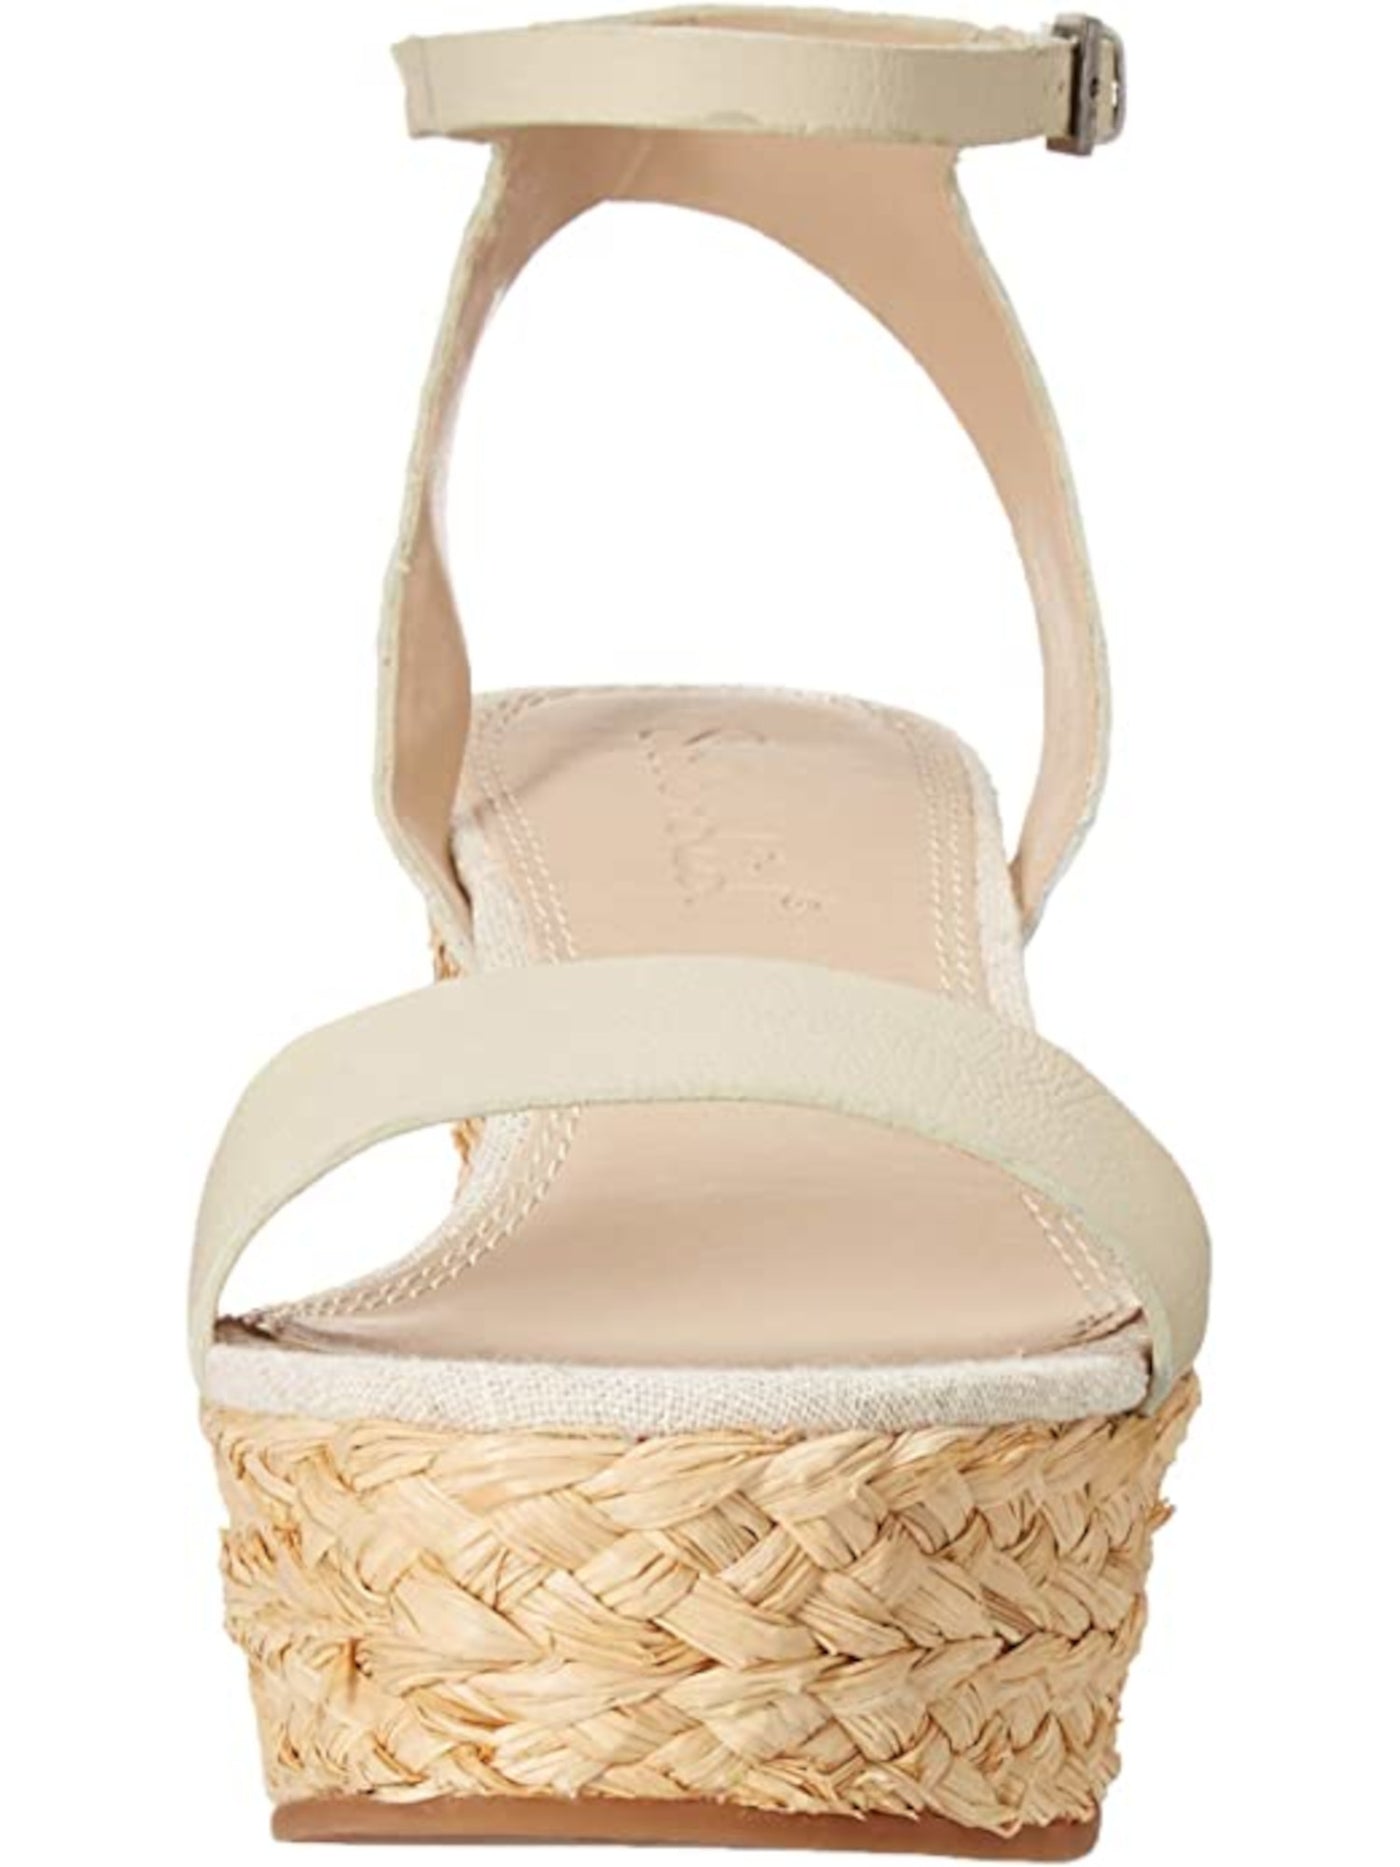 SPLENDID Womens Beige Padded Ankle Strap Adjustable Marie Round Toe Wedge Buckle Leather Dress Espadrille Shoes 10 M